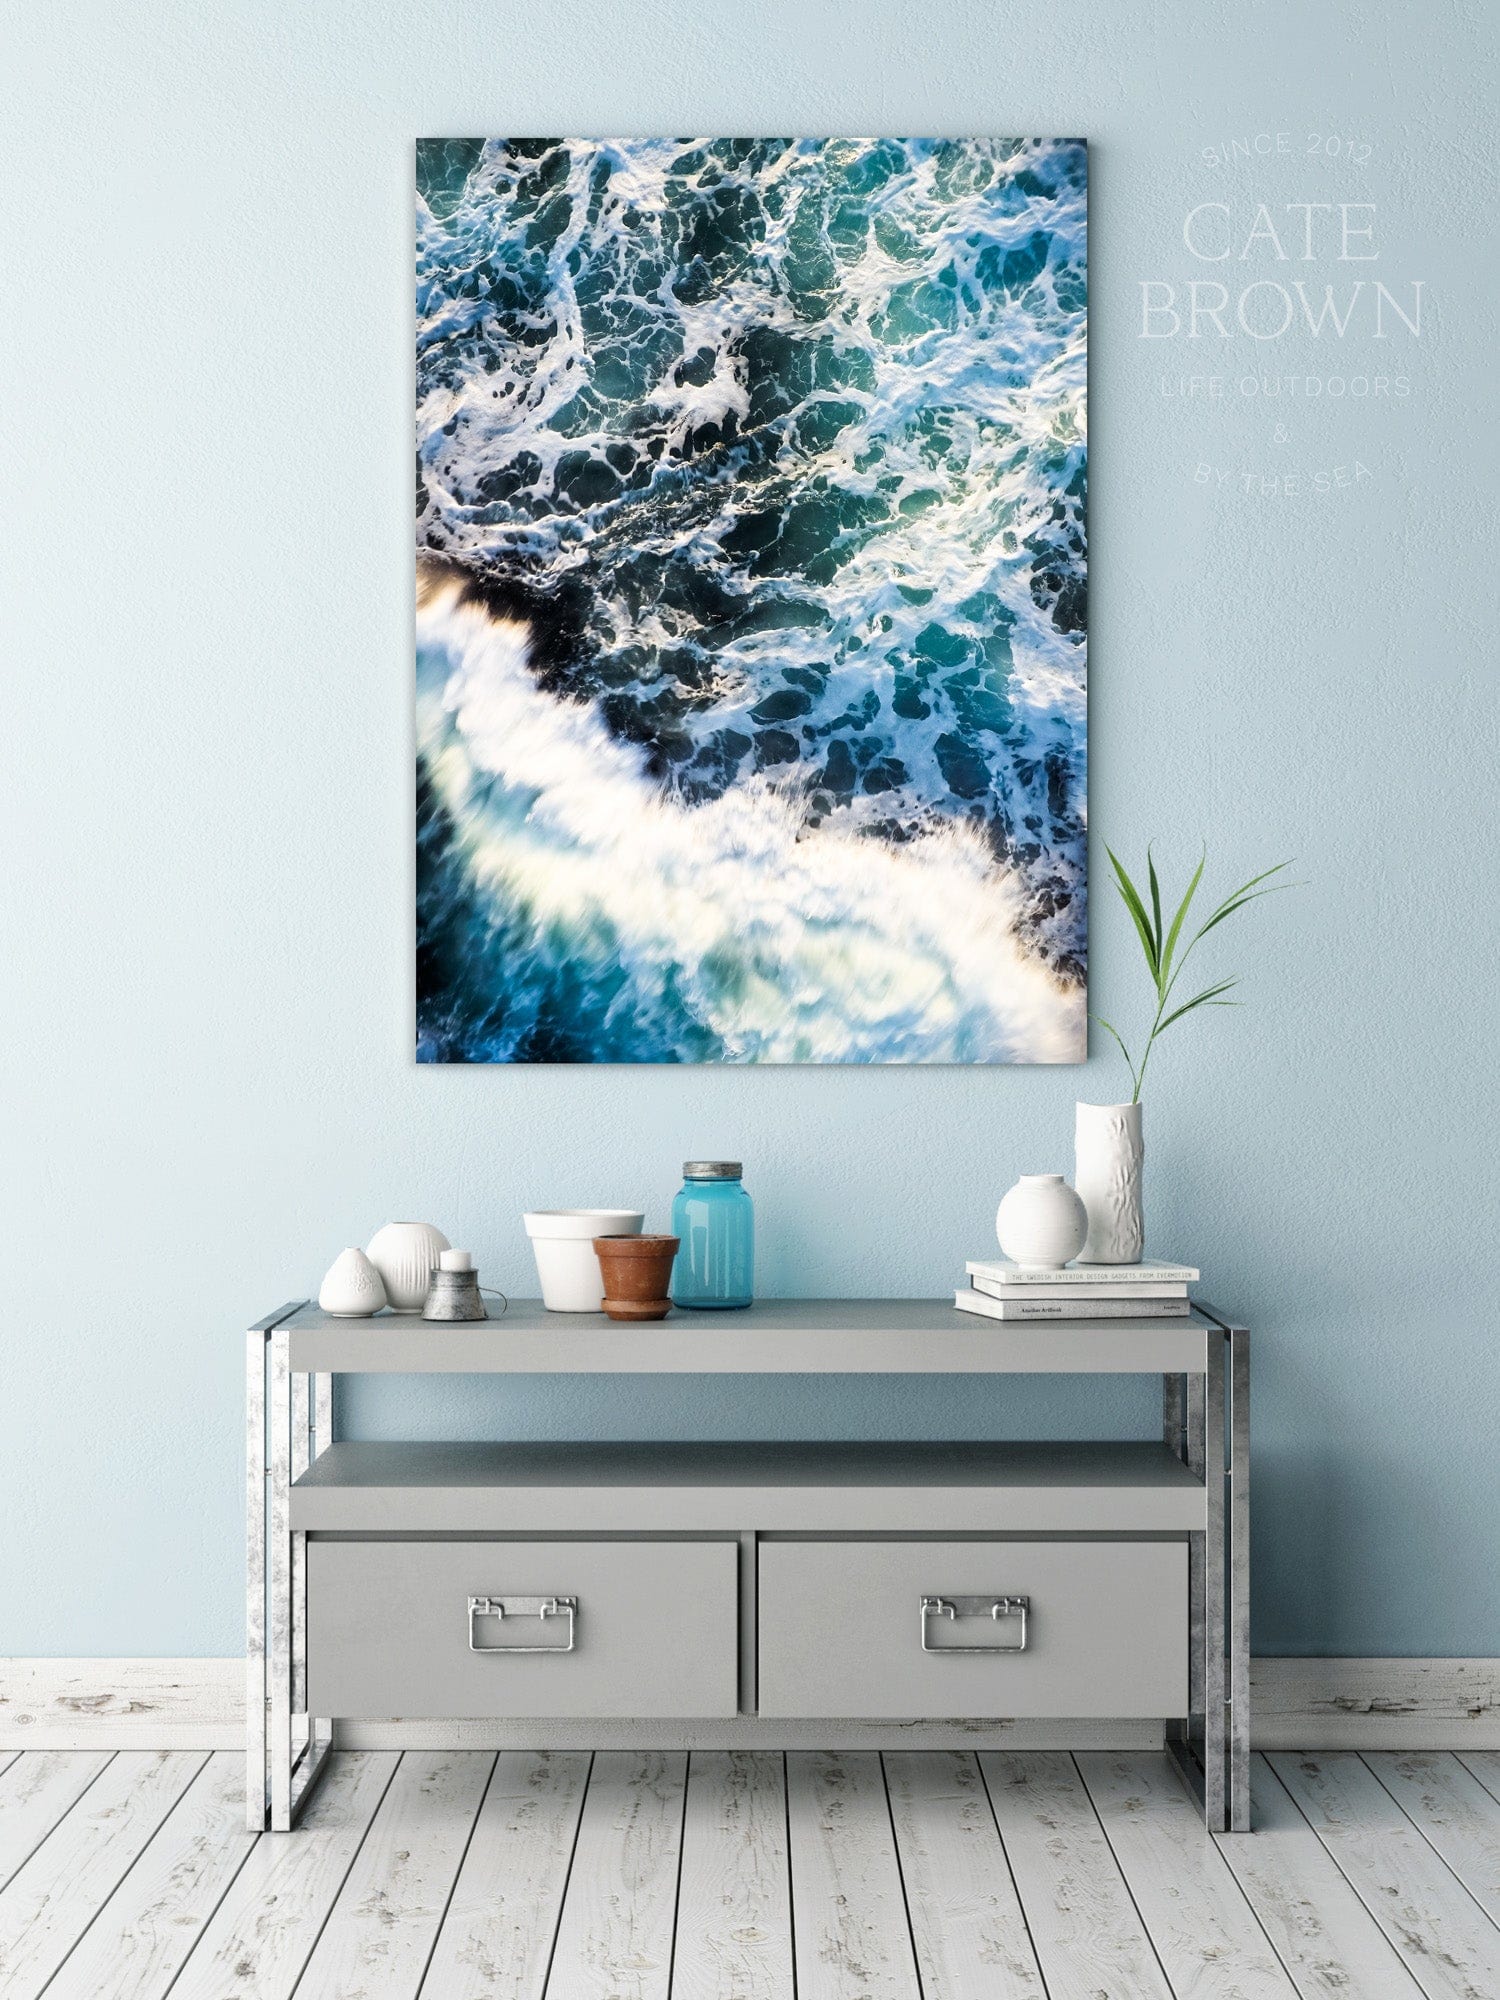 Cate Brown Photo Canvas / 16"x24" / None (Print Only) Beavertail #5  //  Aerial Photography Made to Order Ocean Fine Art